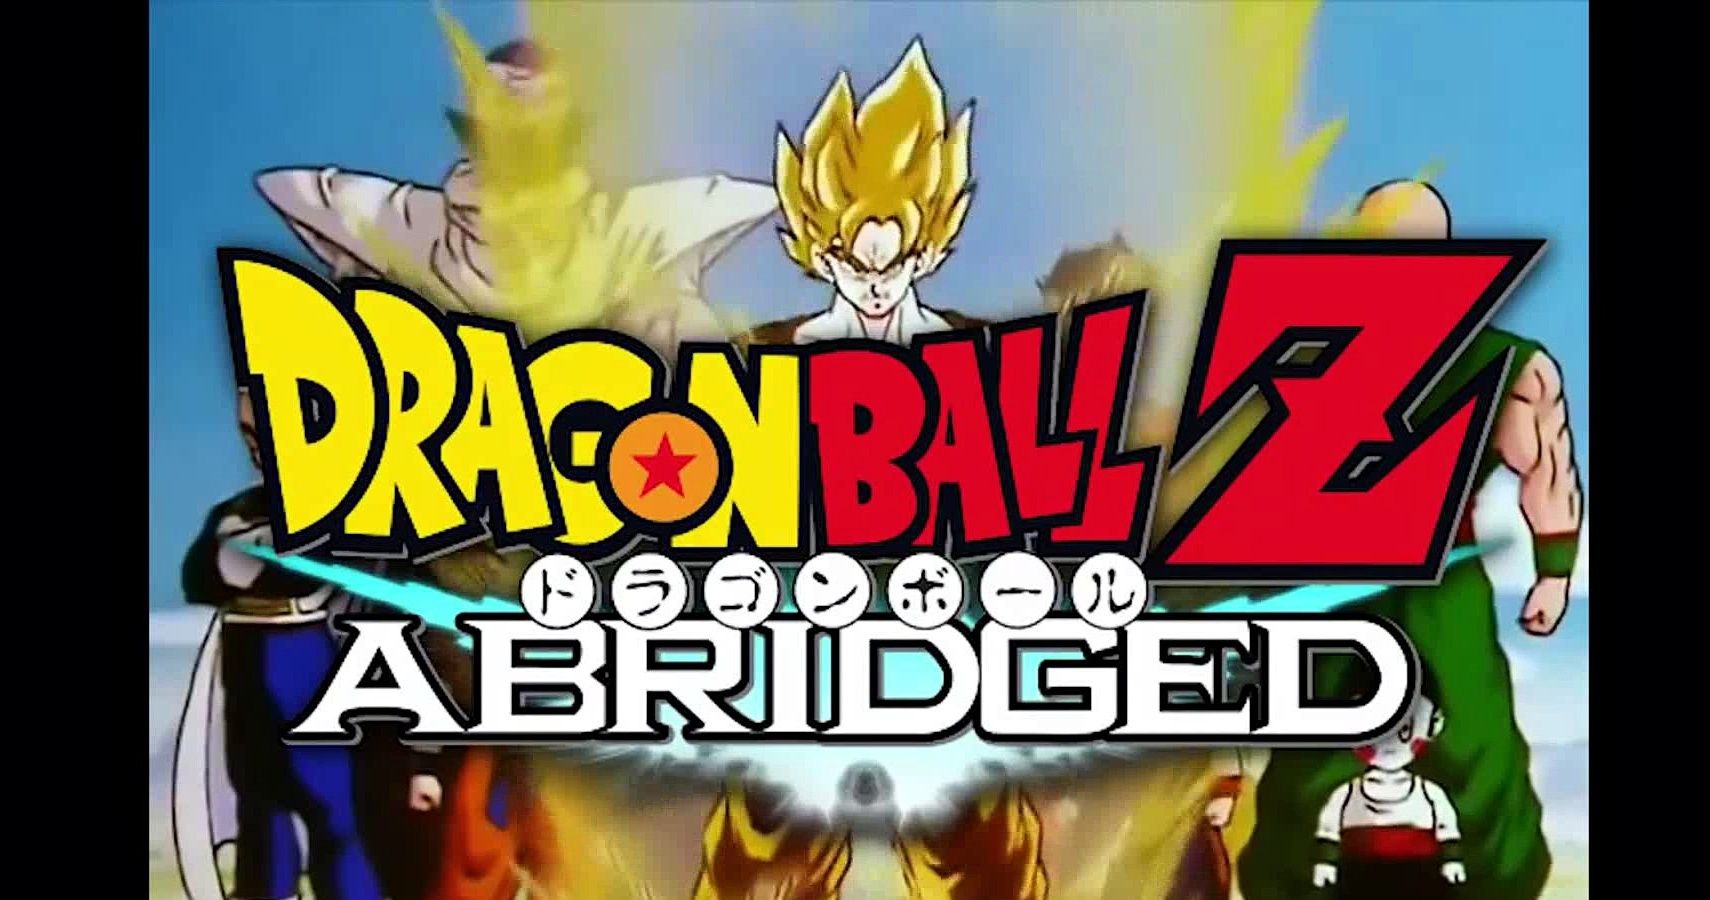 10 Funniest Quotes Of Dragon Ball Z Abridged